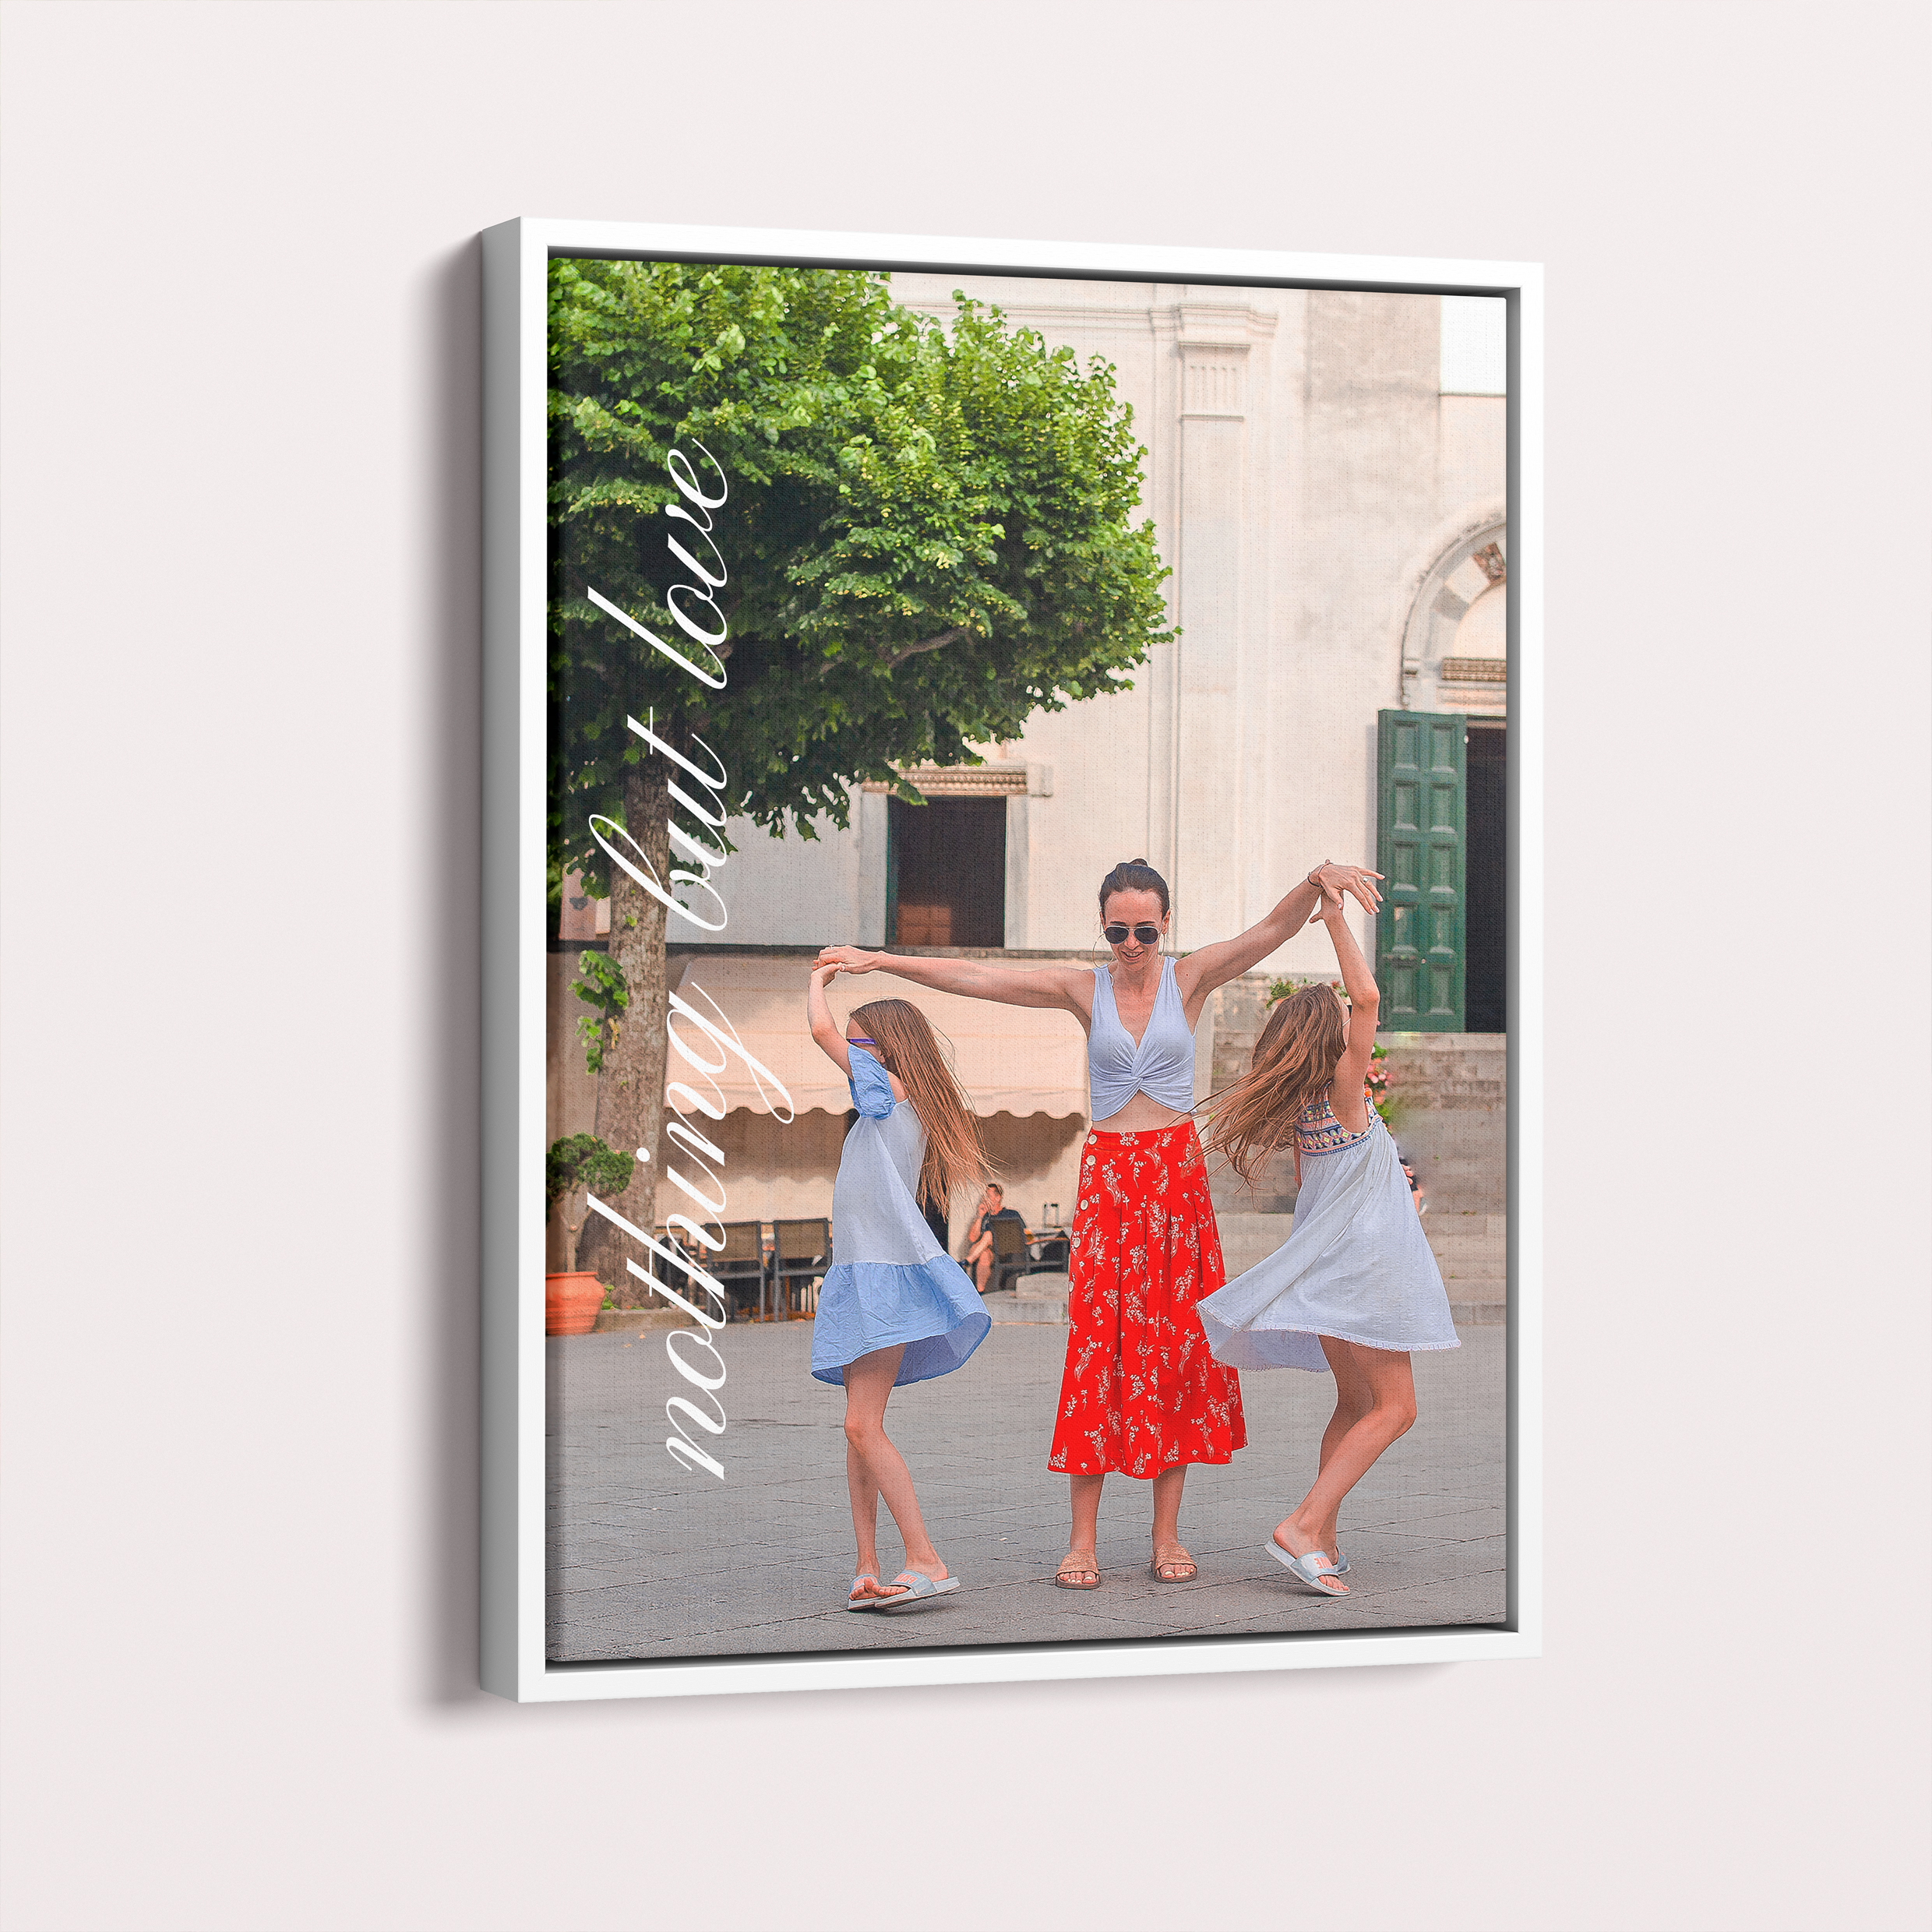 Personalised Nurturing Moments Framed Photo Canvas - Preserve treasured memories with lasting quality